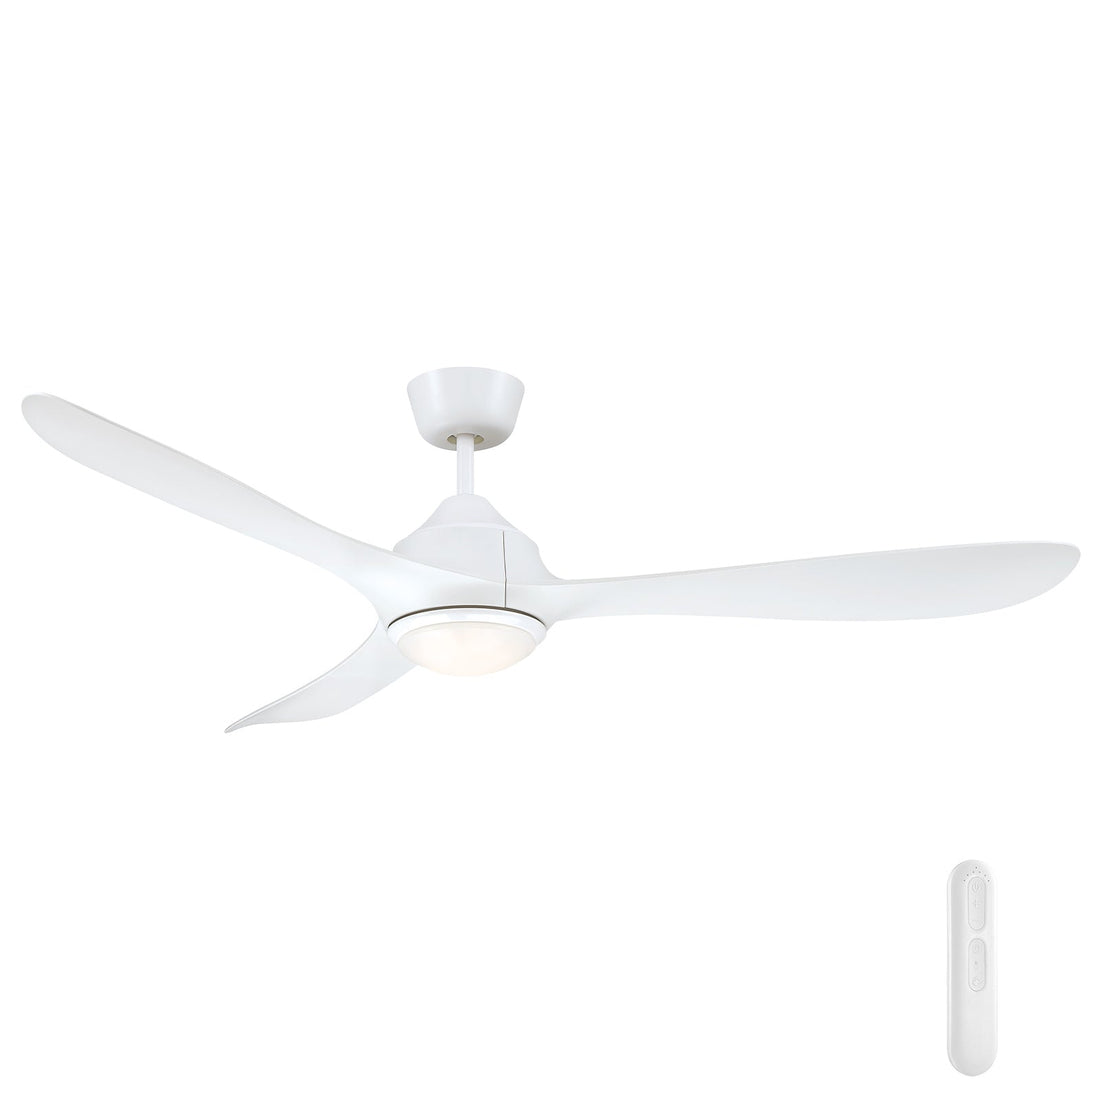 Juno DC Ceiling Fan with LED Light and Remote Mercator